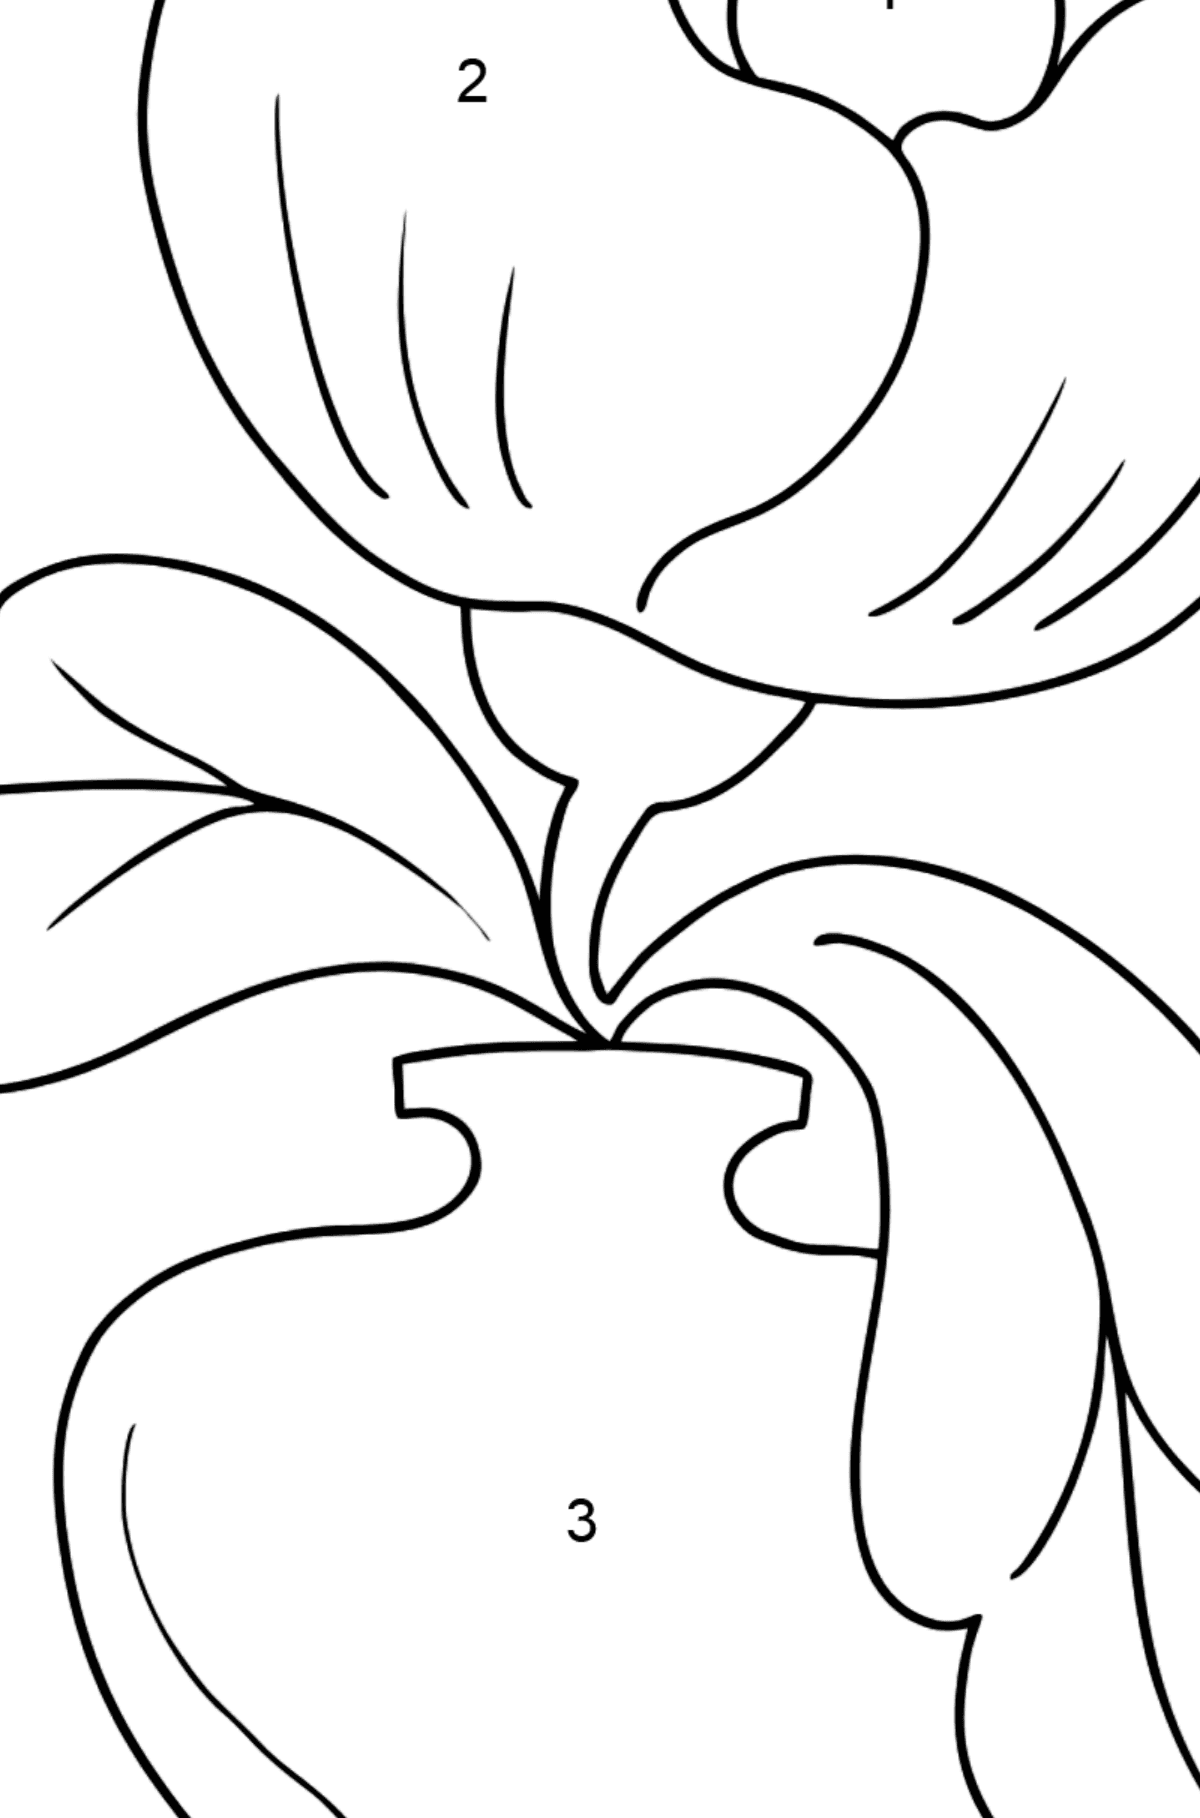 Coloring Page - flowers in a vase - Coloring by Numbers for Kids